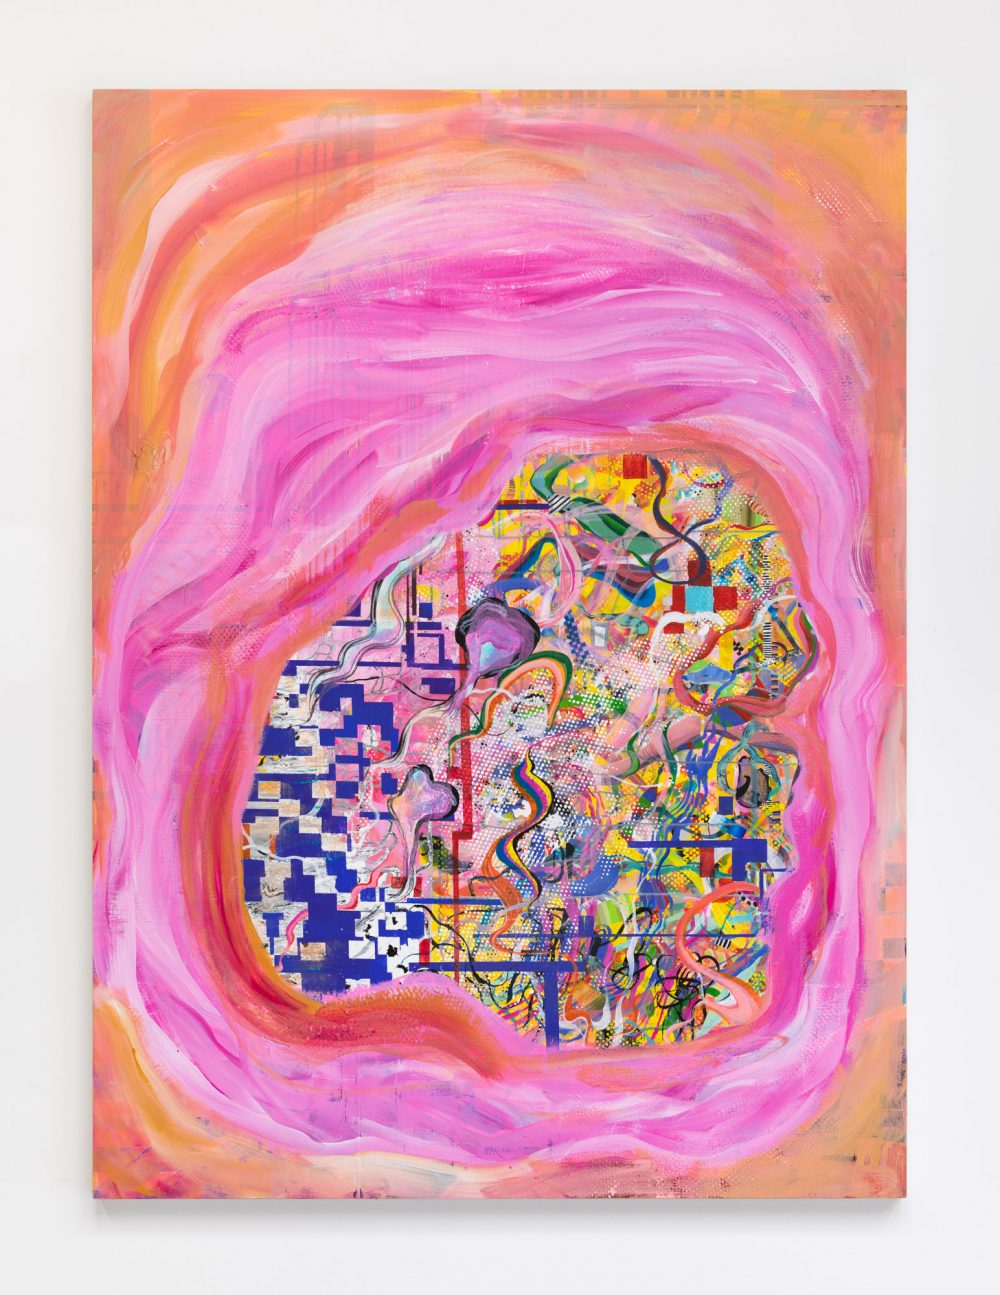 Vertical abstract multicolored painting consisting of layers of shapes. Orange and pink concentric brush strokes form the periphery of the image. At the center are varied small shapes and lines that are layered over one another and appear to be floating within the pink shape. Colors include many shades of red, green, pink, yellow, blue, orange and white.